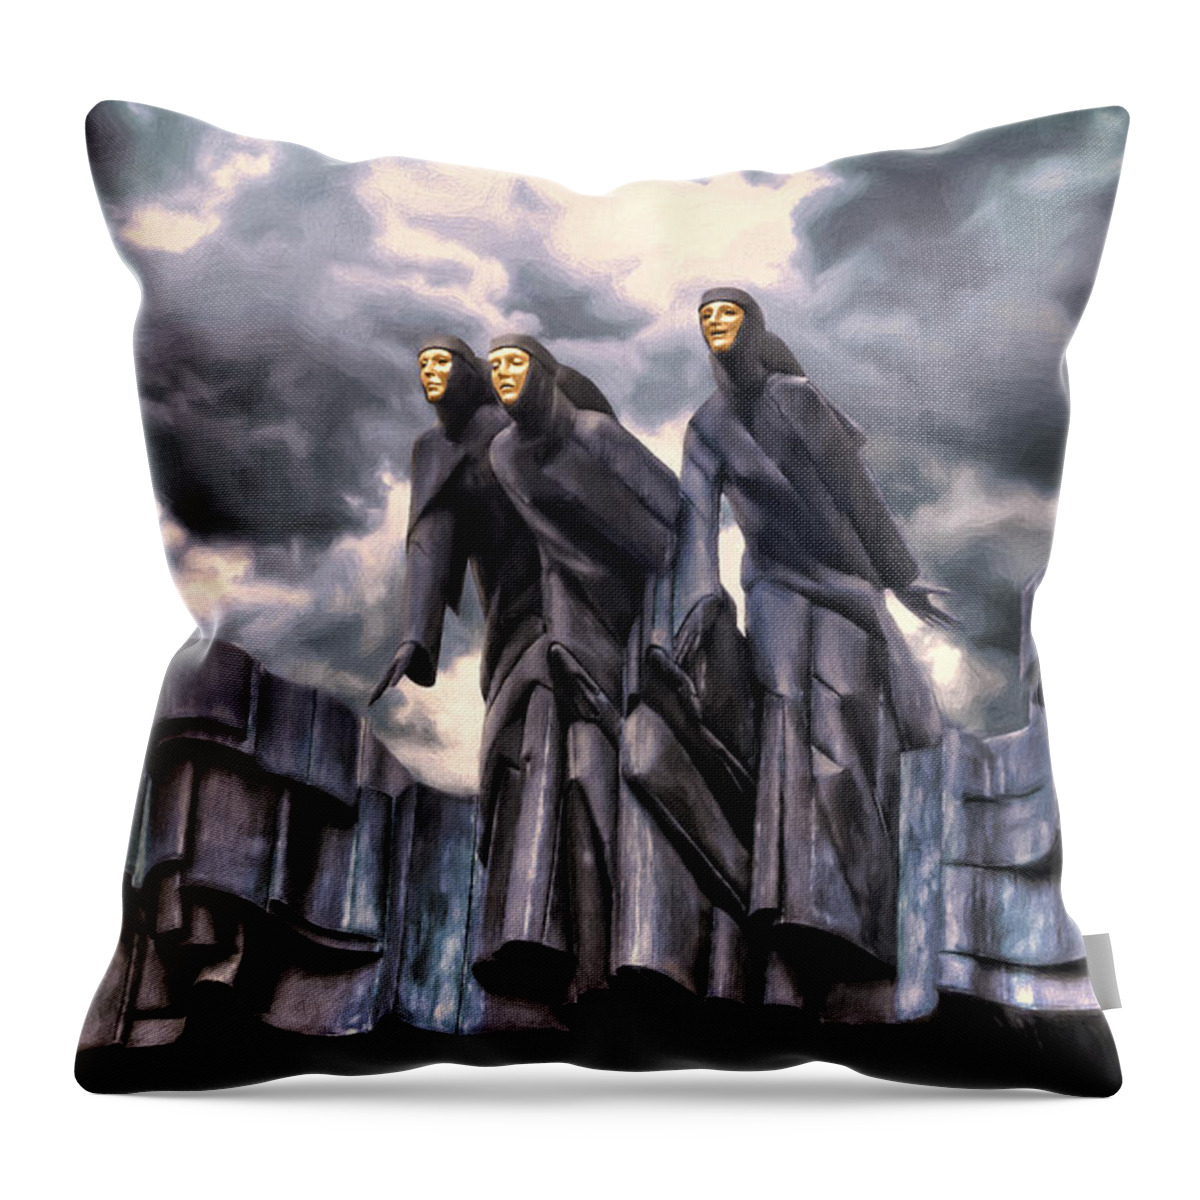 Muses Throw Pillow featuring the digital art The Muses by Pennie McCracken